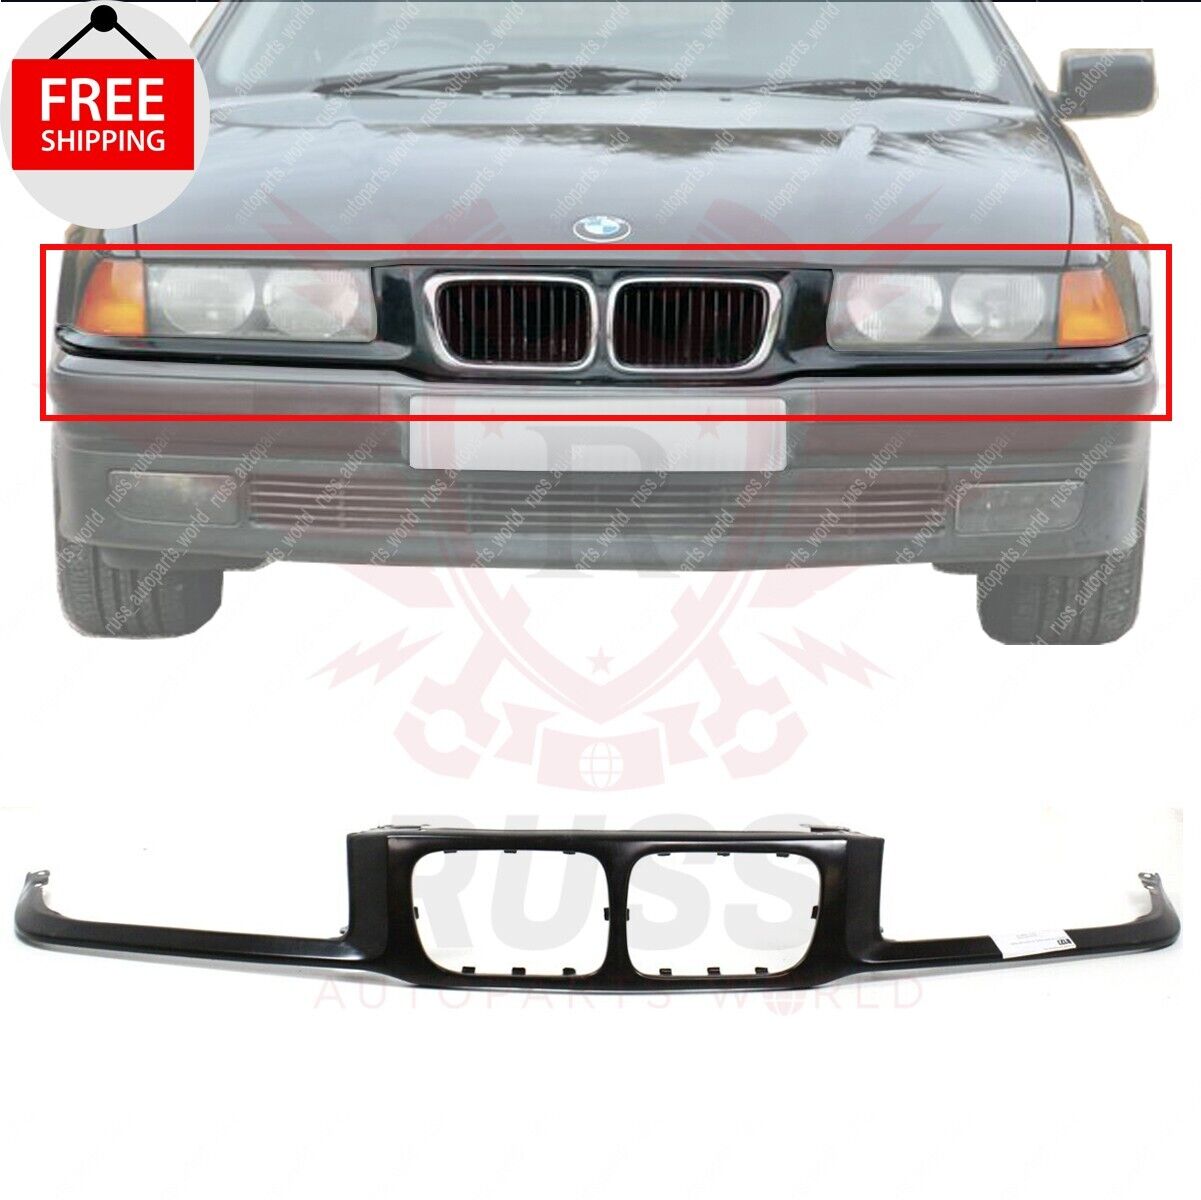 New Front Header Headlight Mounting Nose Panel Fits 1992-99 BMW E36 318 323 328